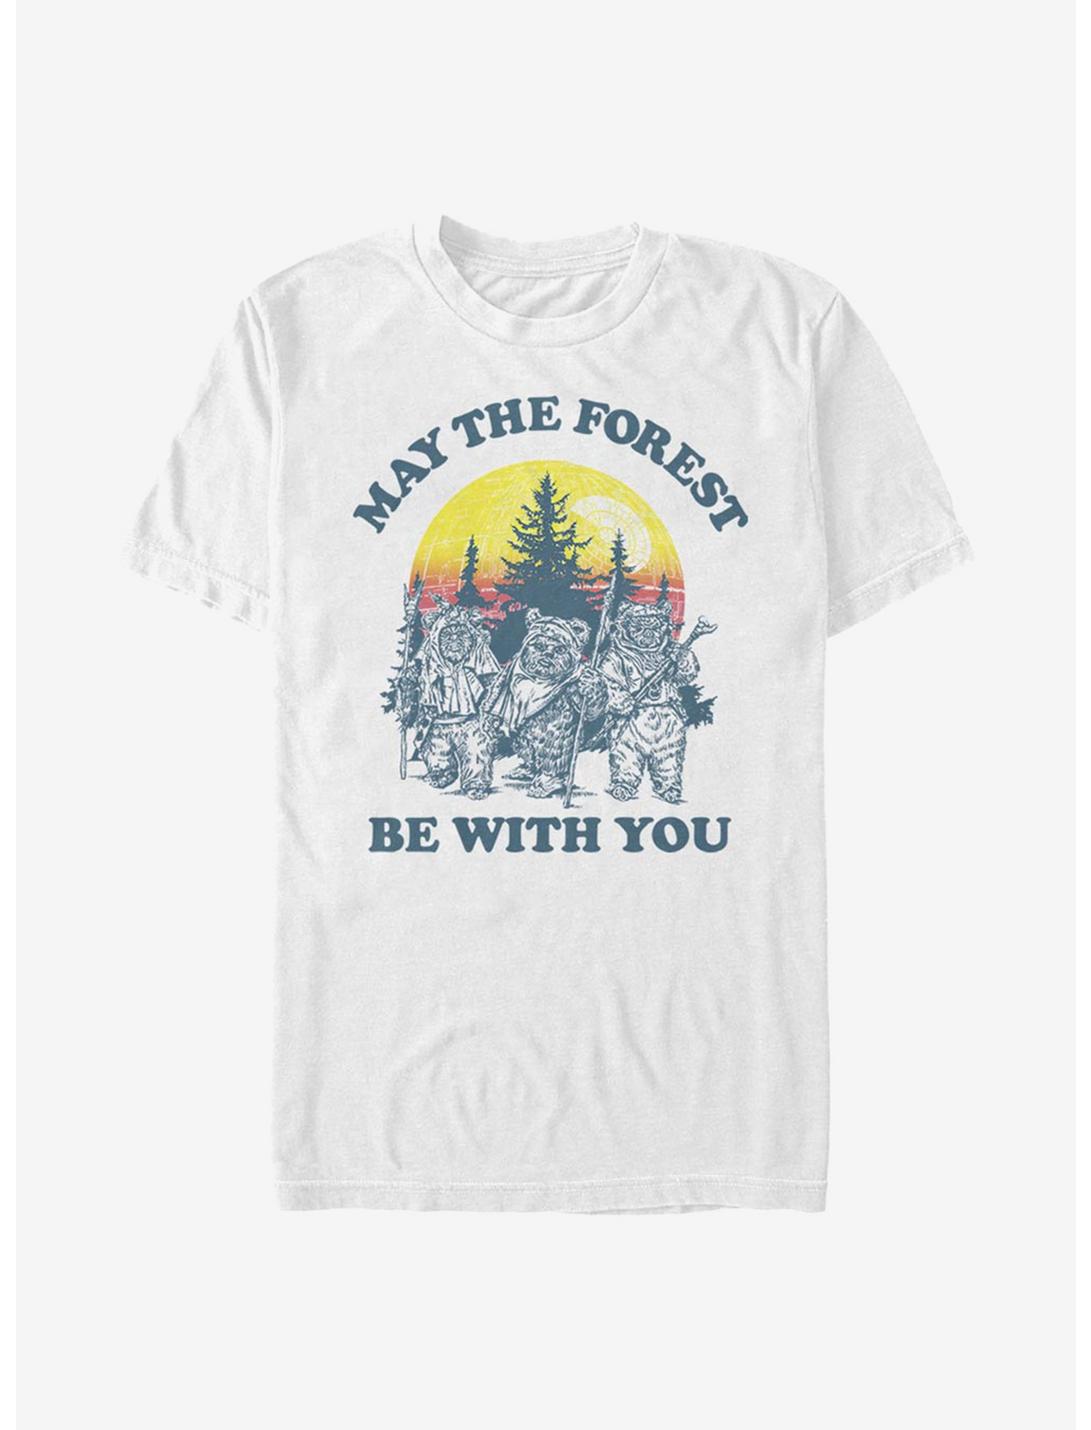 Star Wars Ewok May The Forest Be With You T-Shirt, WHITE, hi-res